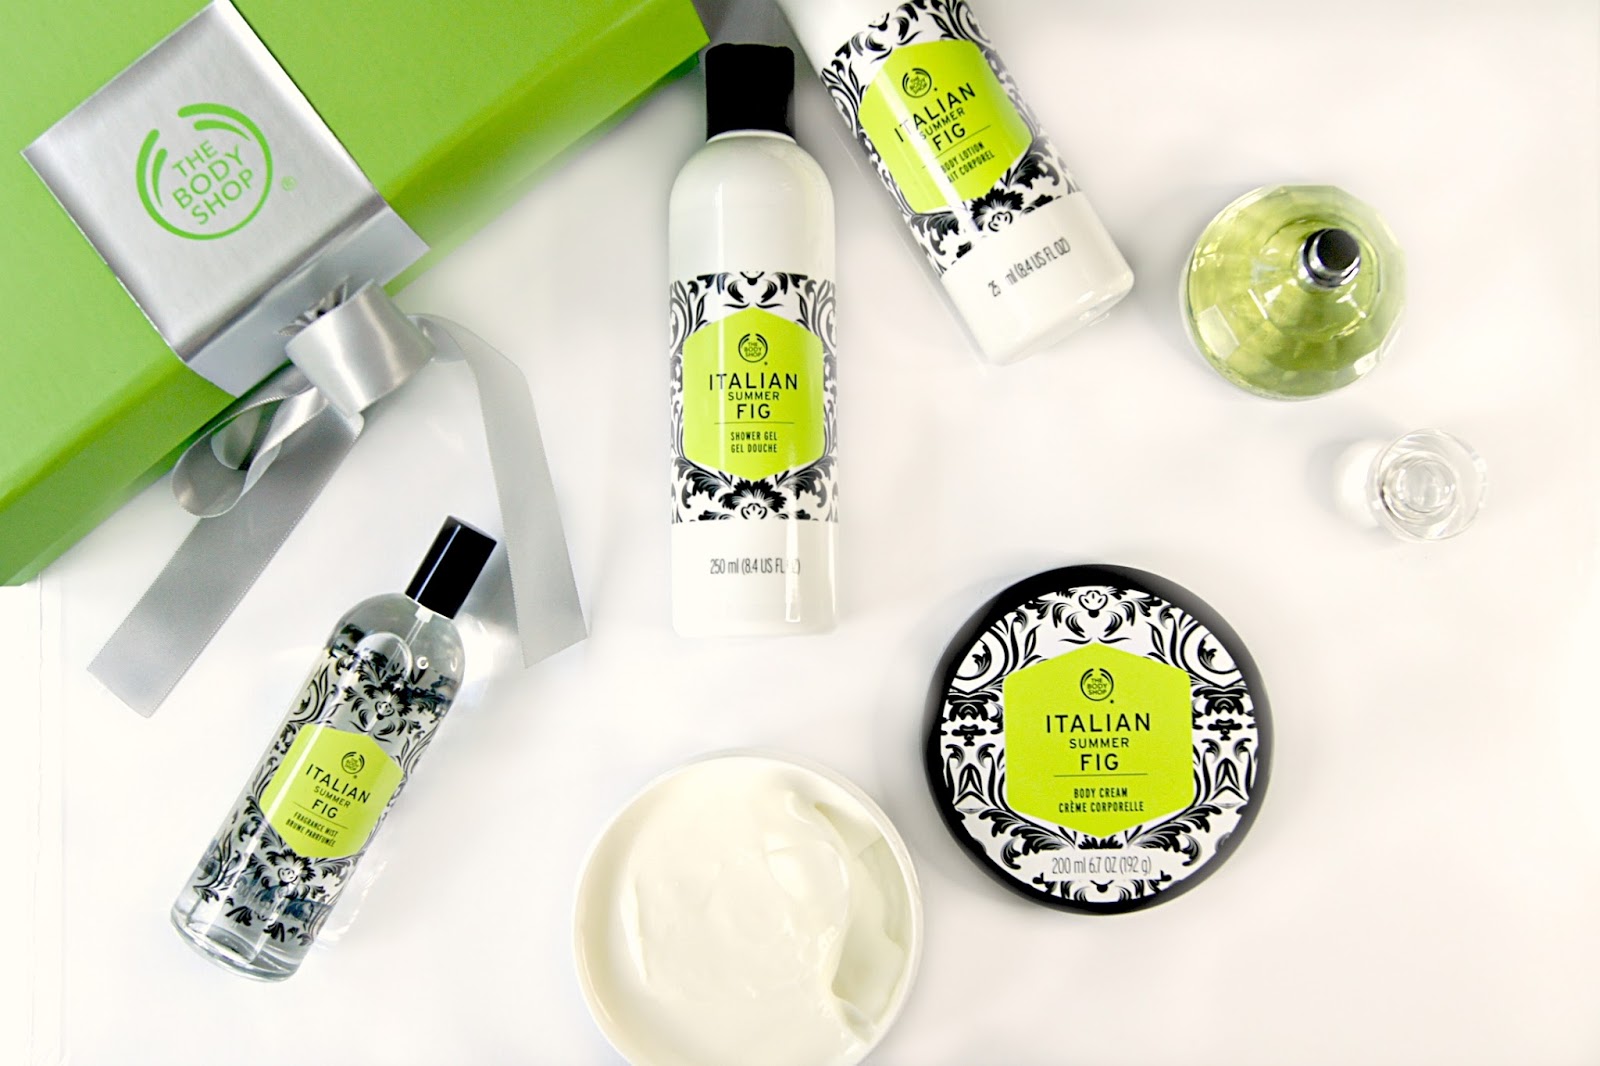 Italian Summer Fig, The Body Shop | Barely There Beauty - A Blog from the Home Counties